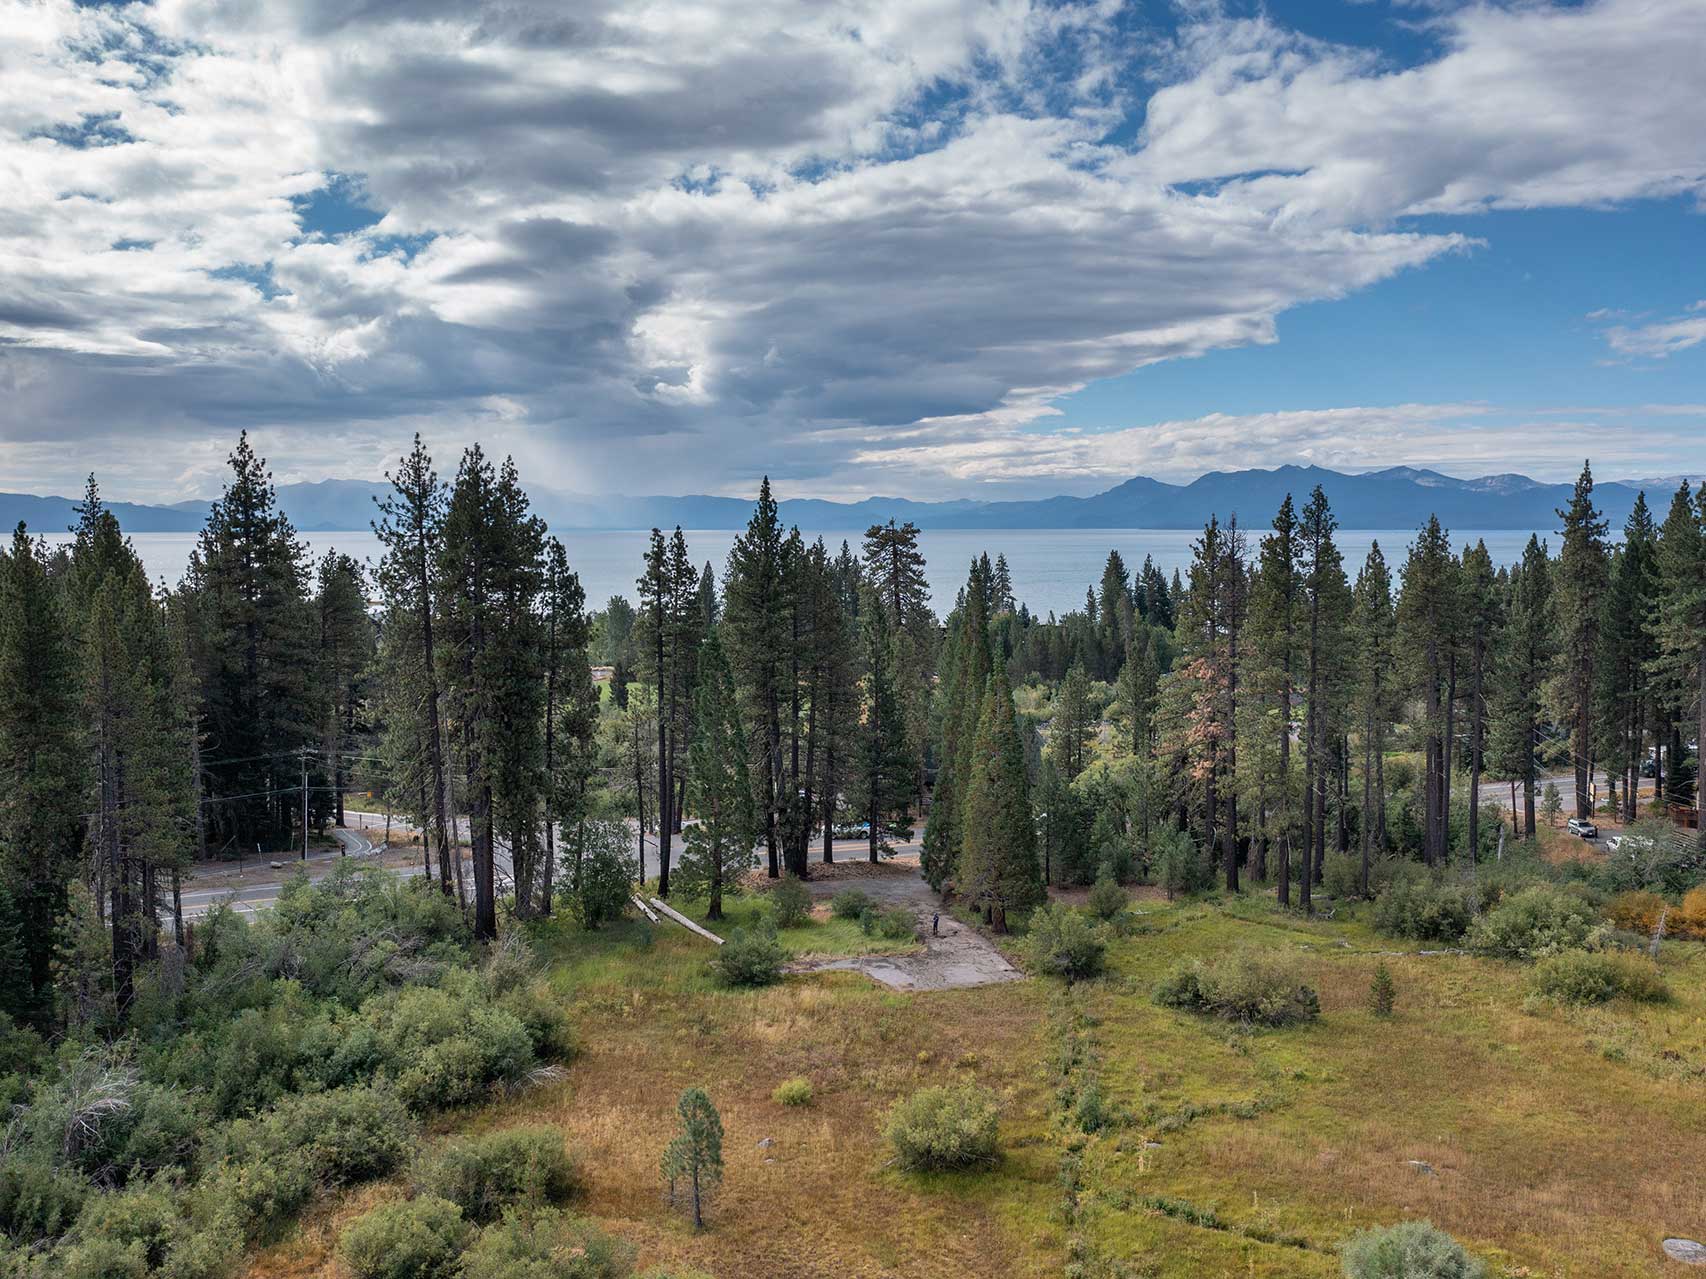 A meadow, a parking area, and lake tahoe in the background